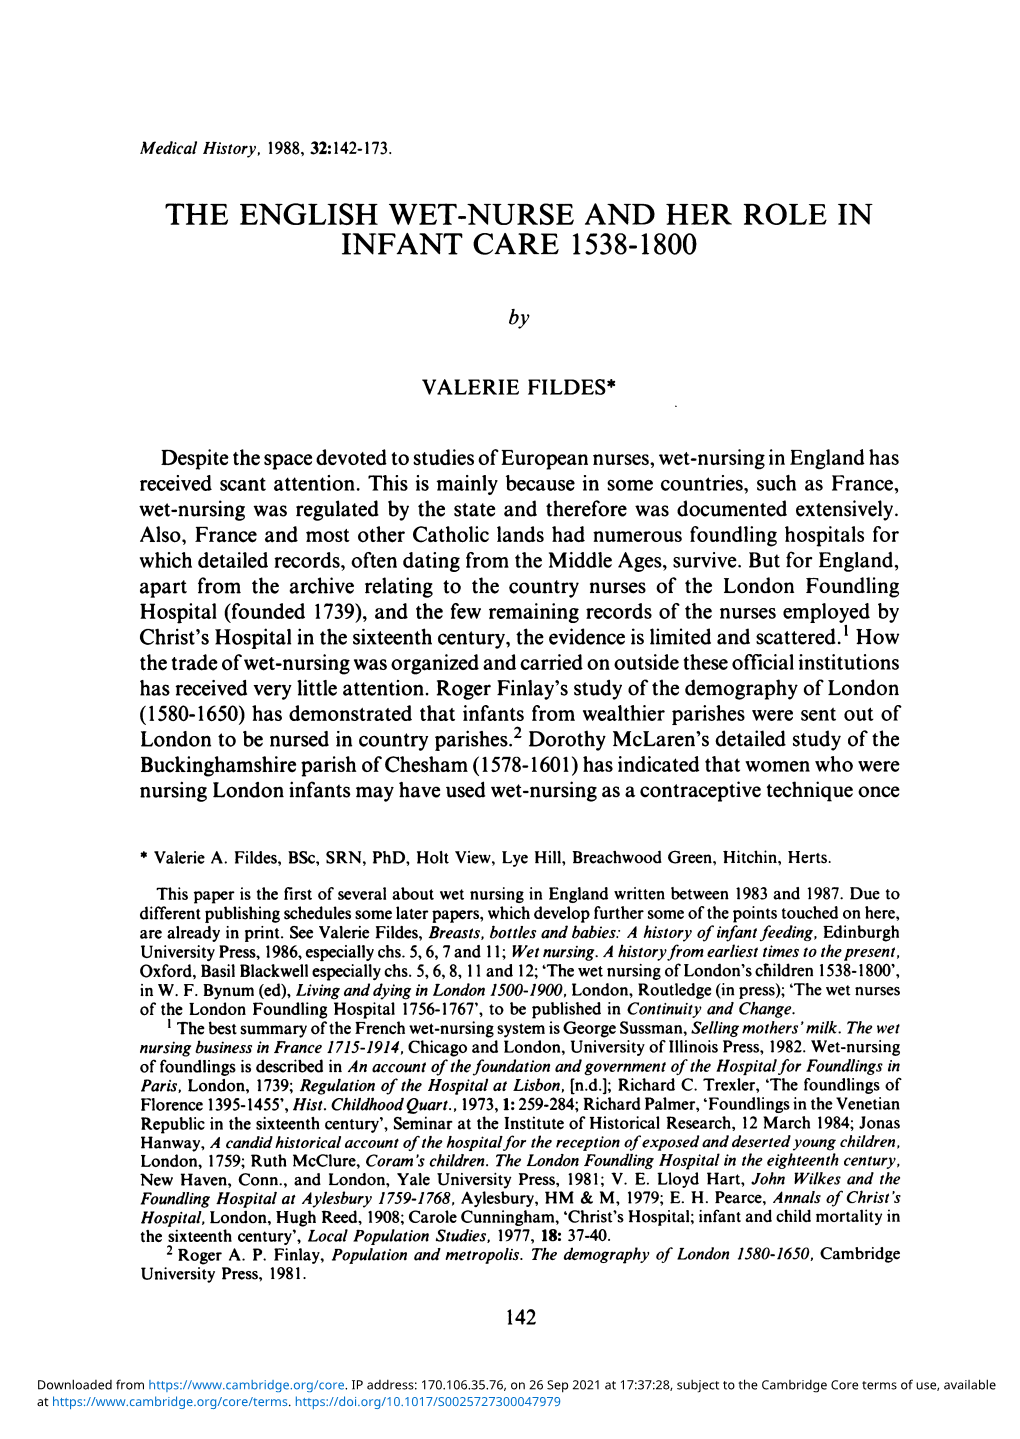 The English Wet-Nurse and Her Role in Infant Care 1538-1800